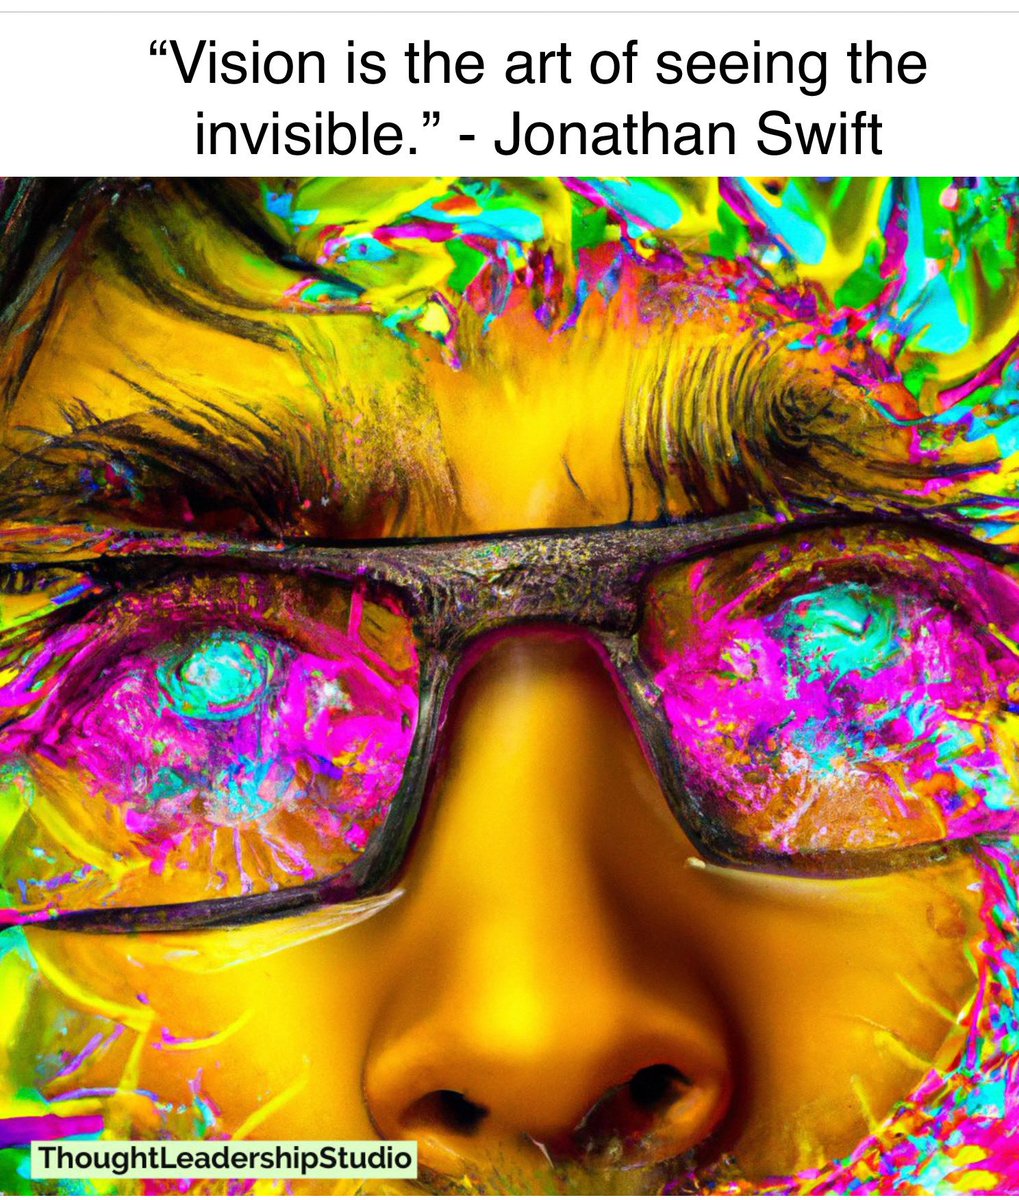 “Vision is the art of seeing the invisible.” - Jonathan Swift

#podcasts and #blogs on #inspiration at thoughtleadershipstudio.com/search/podcast…

#creativity #thoughtleadership #motivation #insight #vision #futurism #paradigmchange